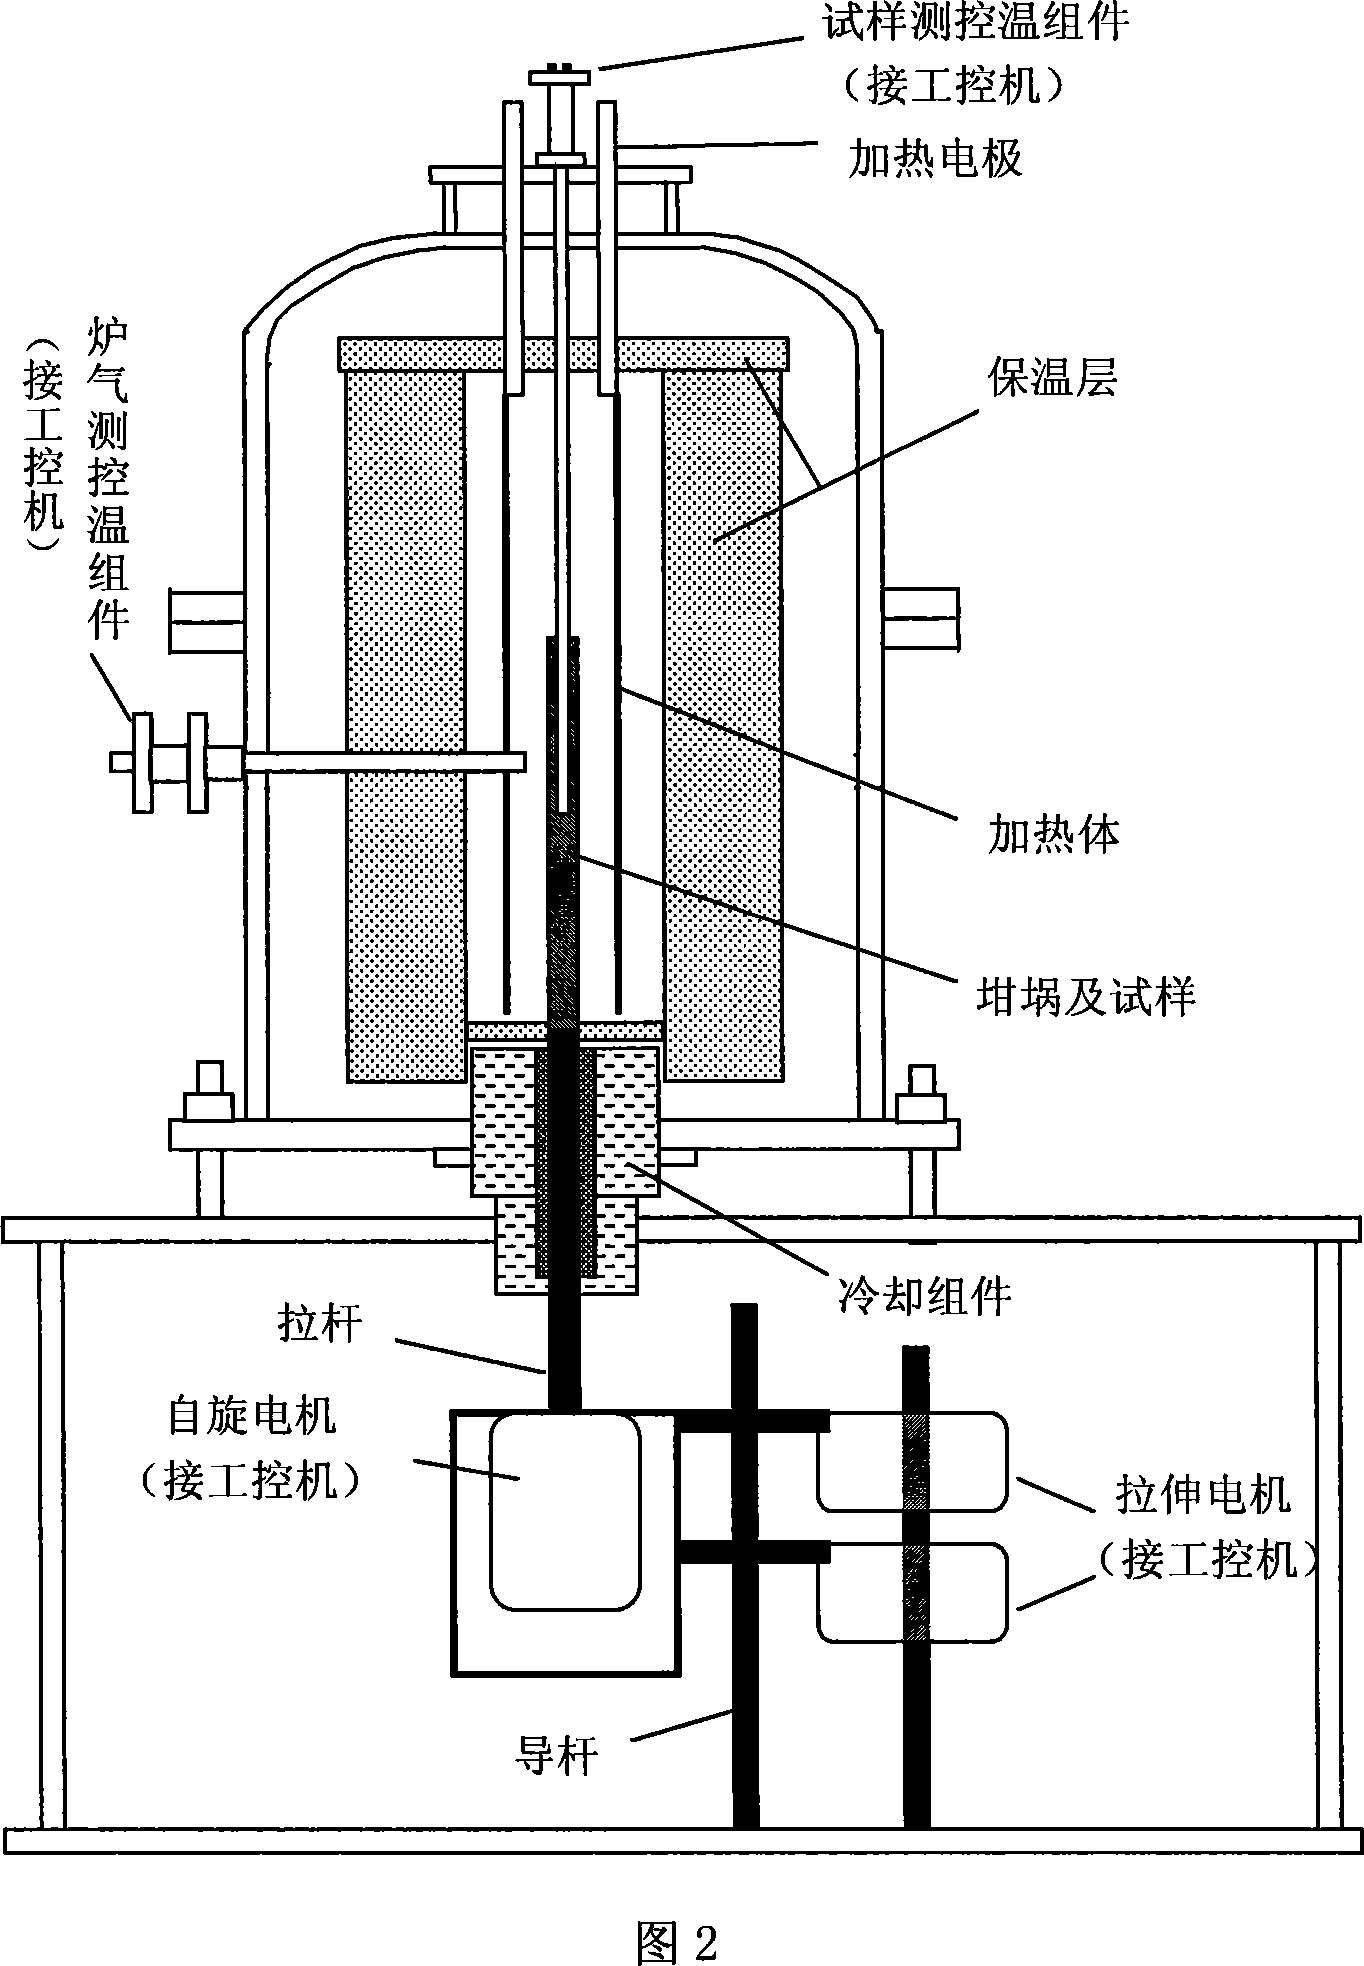 Physical simulating method and device during continuous-casting billet coagulation tissue growth process